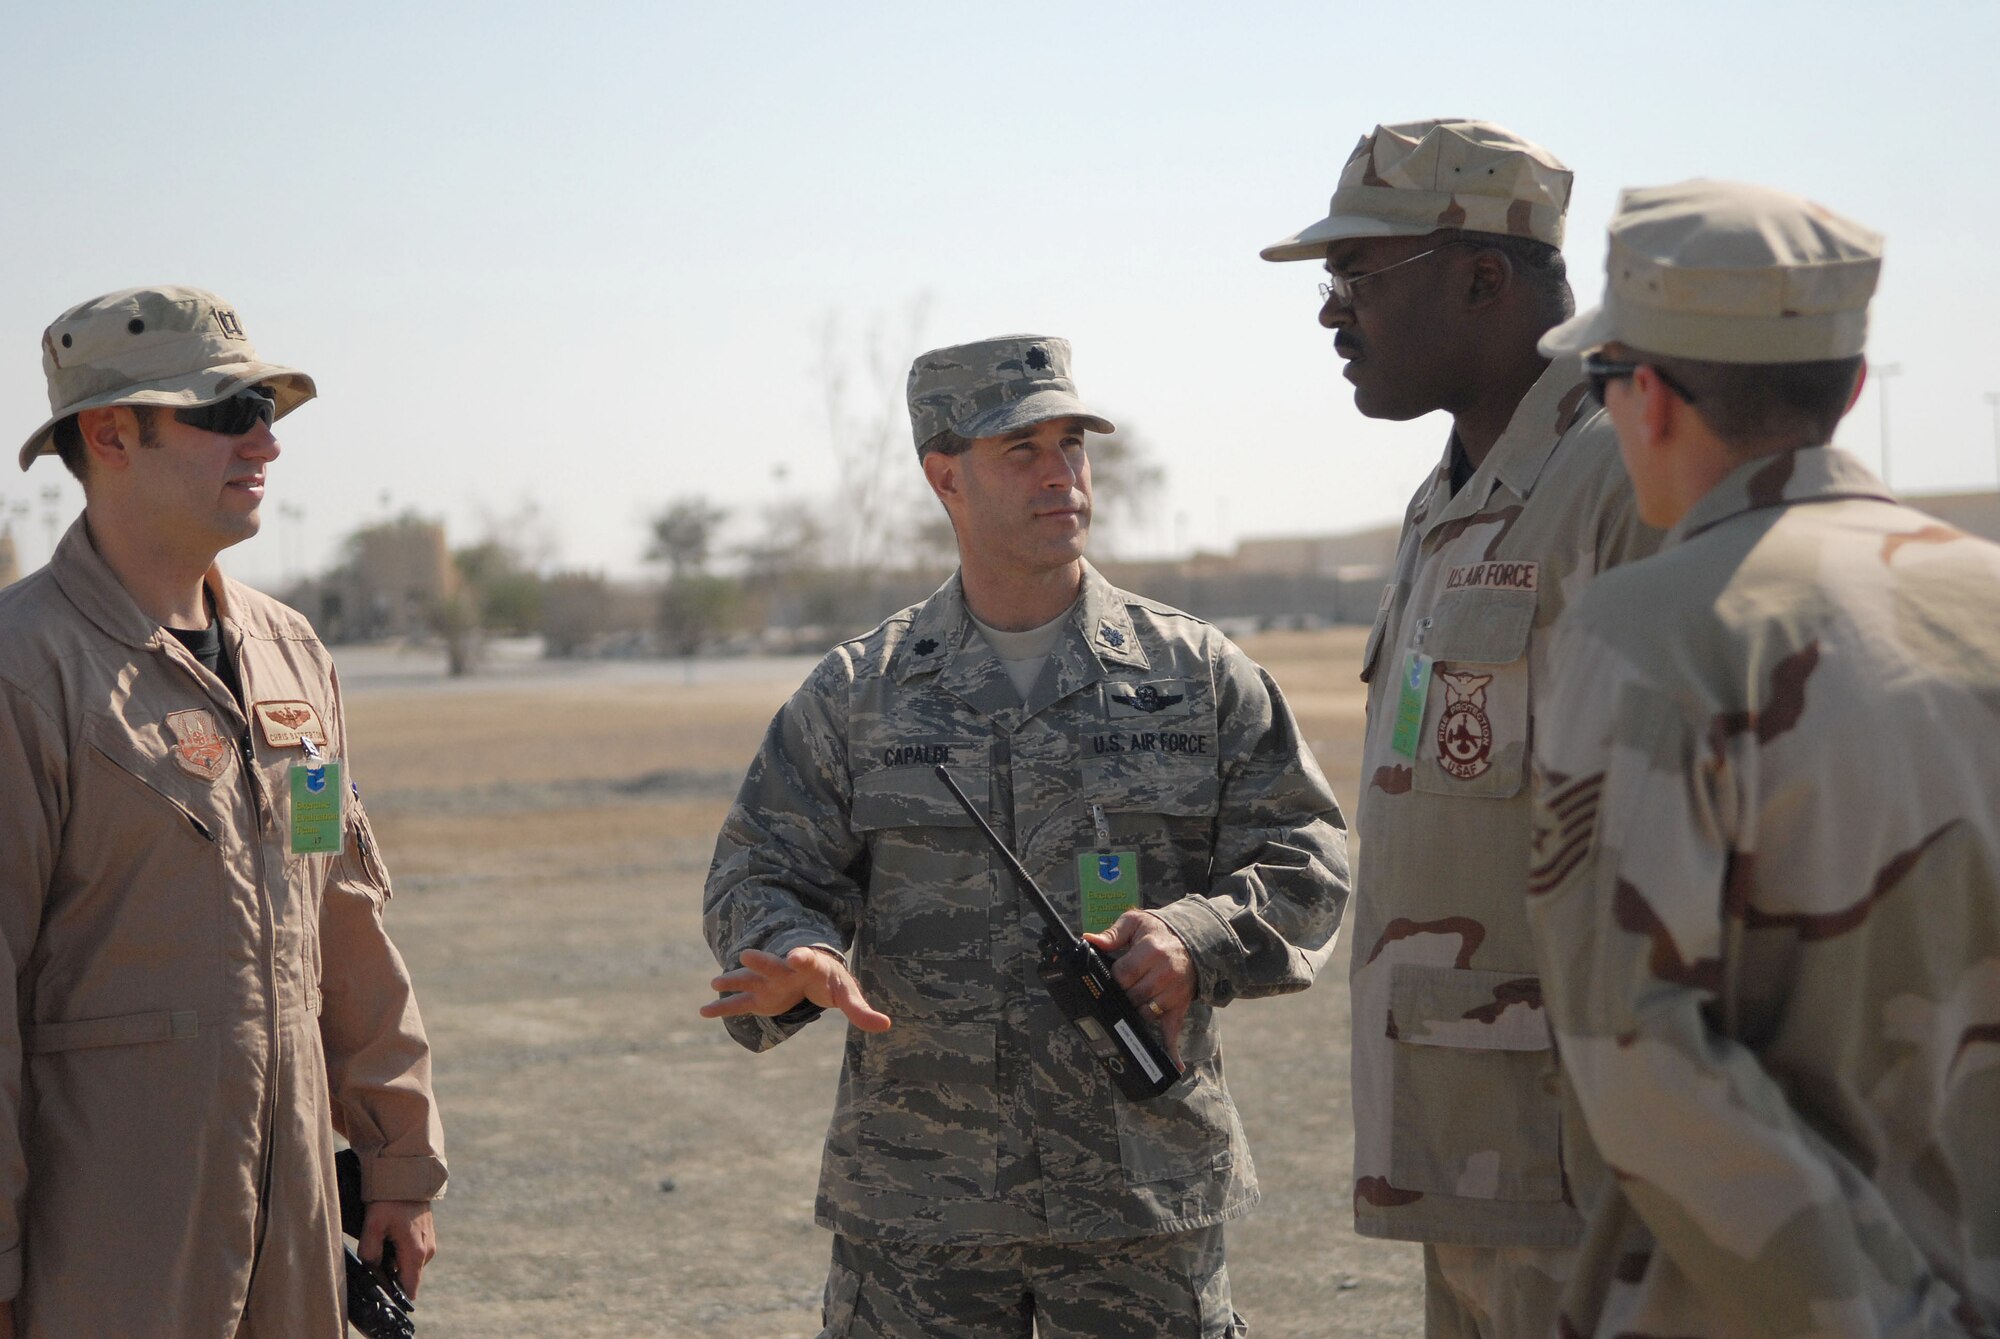 SOUTHWEST ASIA -- Left to right: Capt. Chris Batterton, 380th Air Expeditionary Wing Safety; Lt. Col. Shane Capaldi, 380th Air Expeditionary Wing Plans and Programs; Tech. Sgts. Brian Miller and Jack Hartman, both of the 380th Expeditionary Civil Engineer Fire and Emergency Services Flight, all gather at the scene of a simulated terrorist attack here Dec. 12. The Airmen are all part of the Exercise Evaluation Team who plan and implement exercises to test and evaluate the 380th Air Expeditionary Wing's response to real-world scenarios. (US Air Force photo by Tech. Sgt. Denise Johnson) (released)